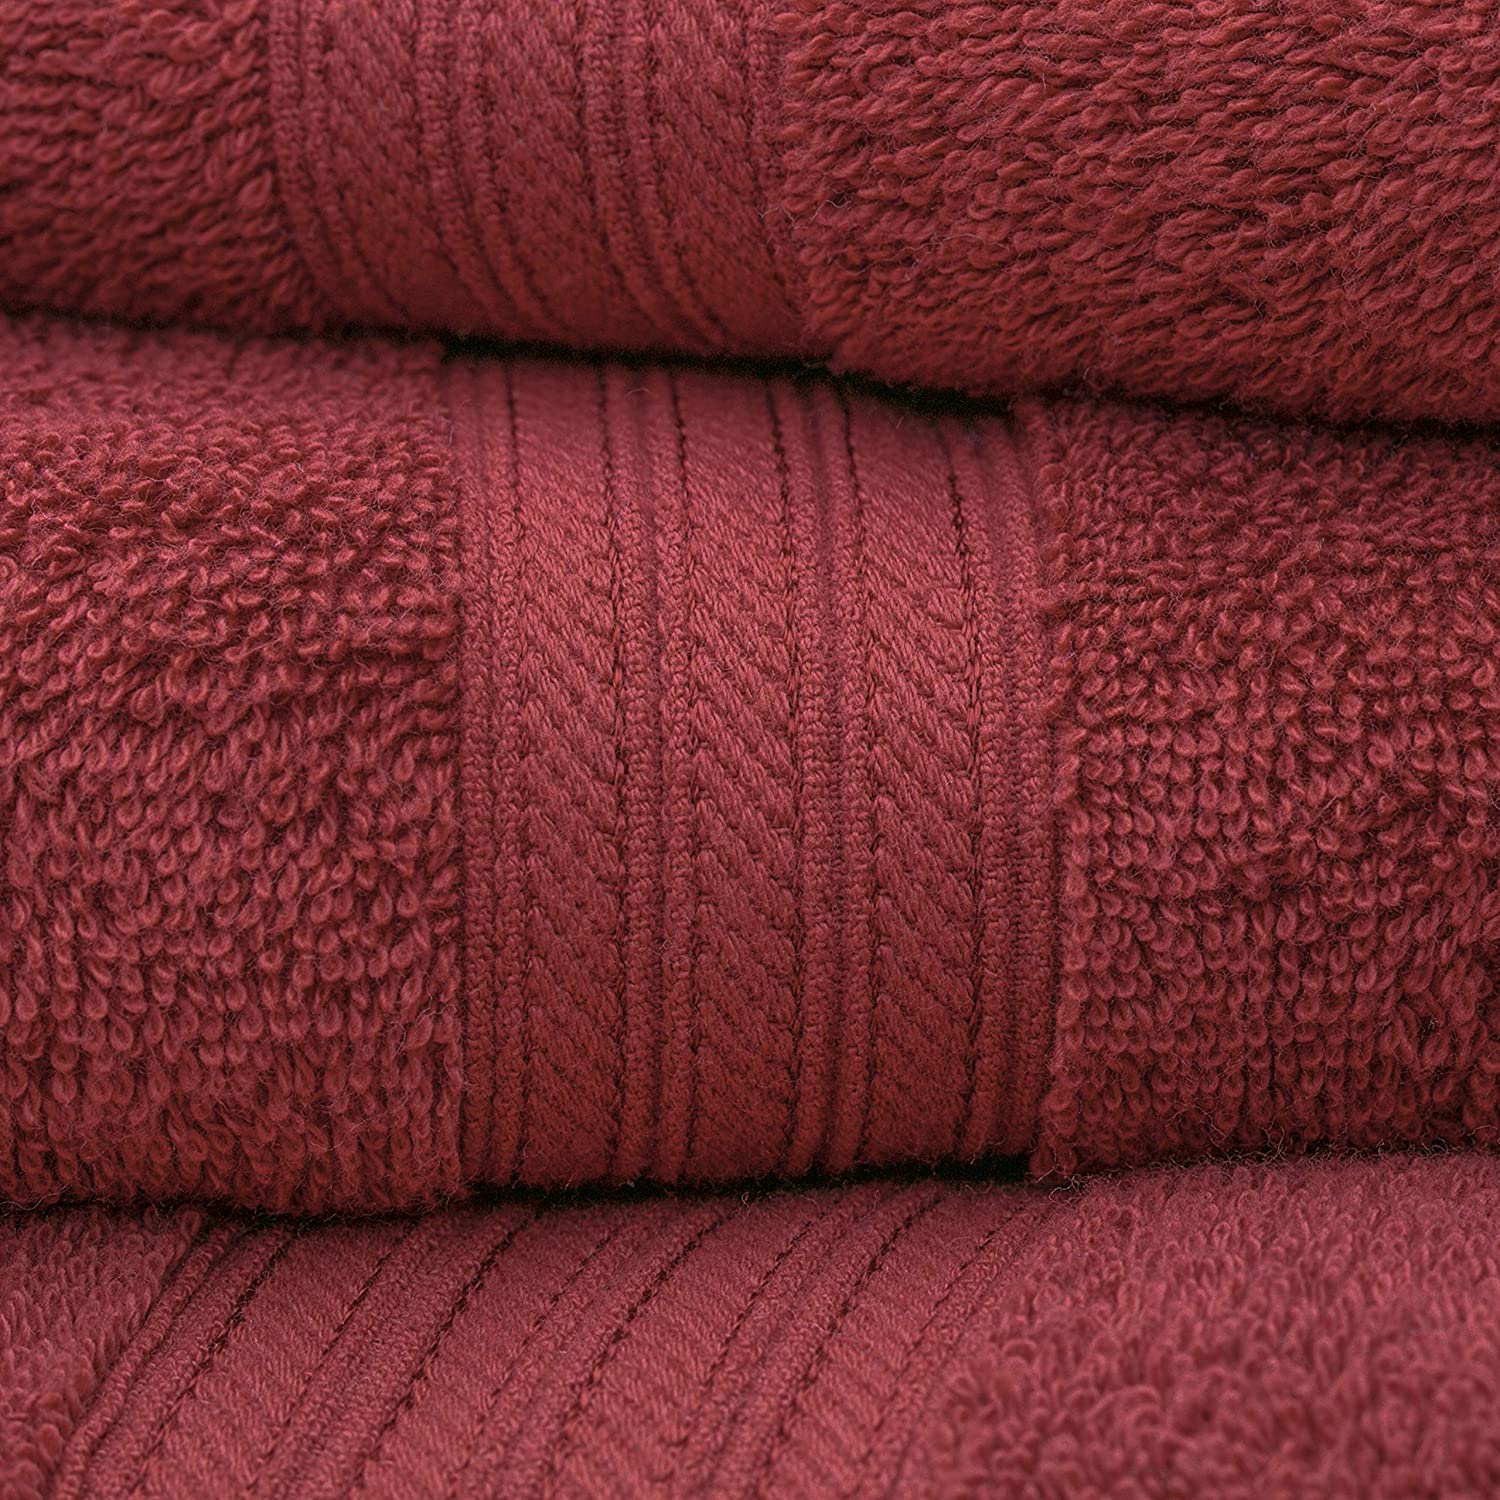 Baltic Linen Majestic Heavy Weight Cotton Towels, 2 Bath Towels, 2 Hand Towels, 2 Washcloths, Red, 6 Piece Set